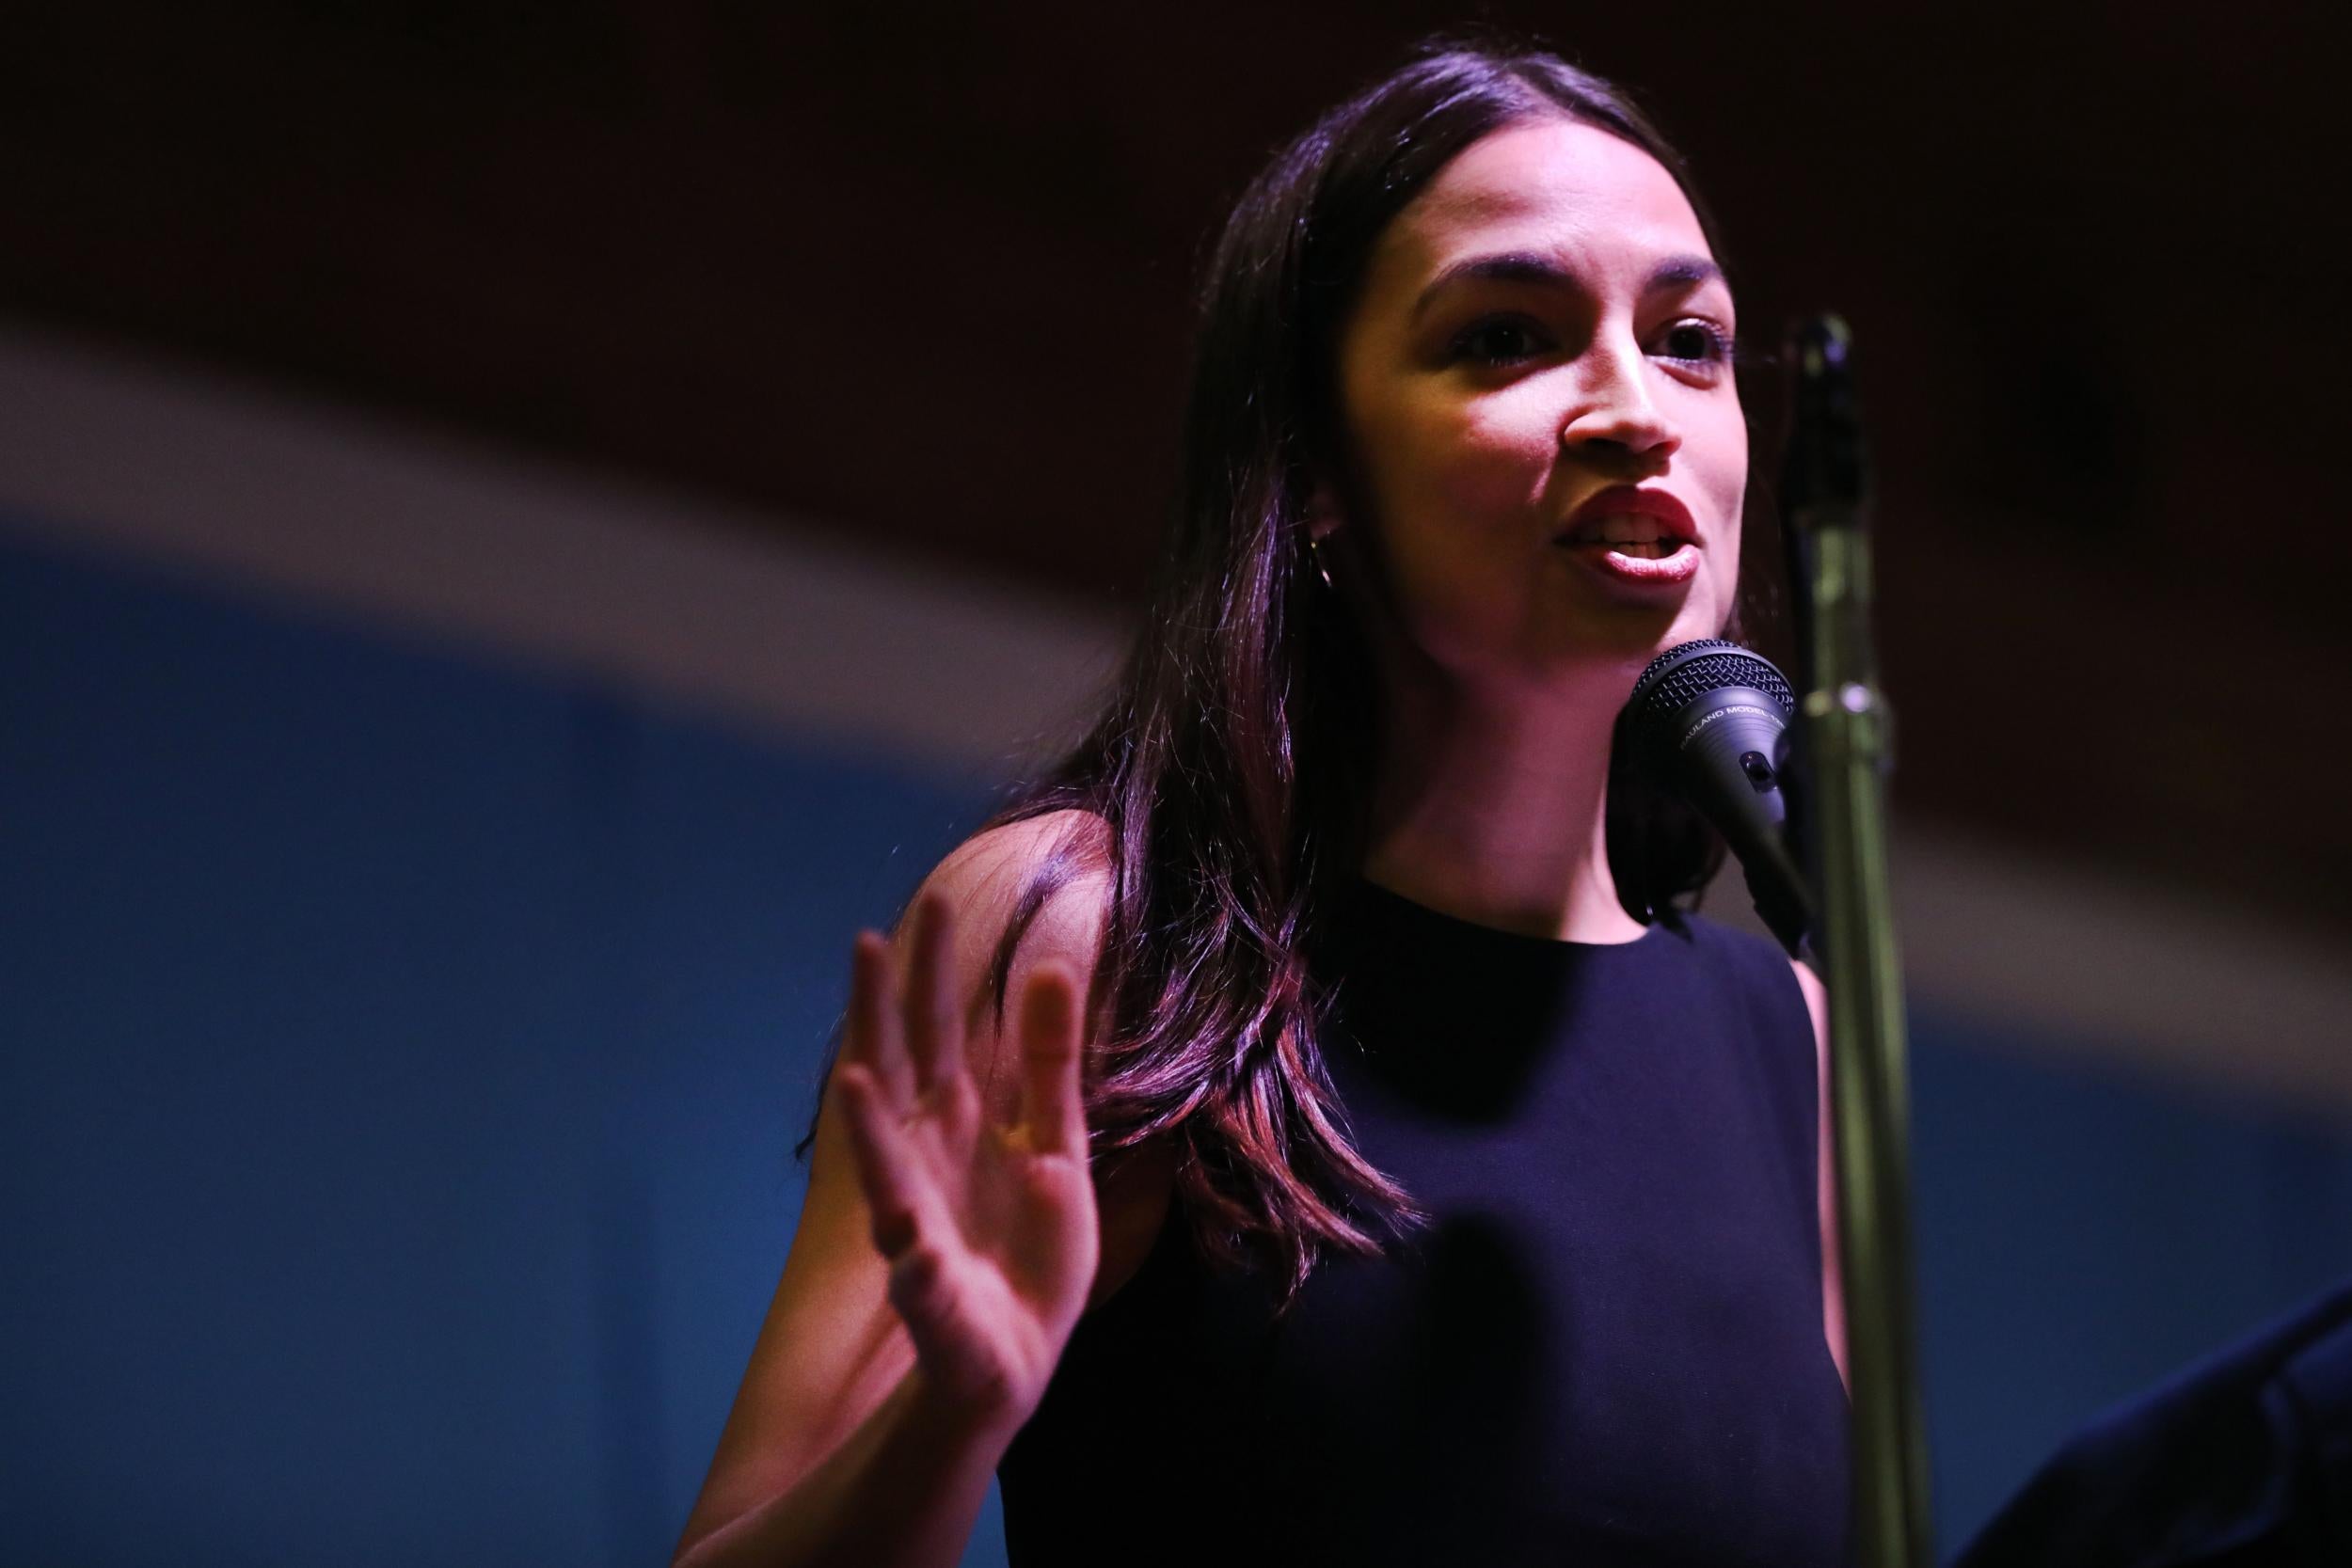 Alexandria Ocasio-Cortez hasn't held back with her criticism of the Trump administration, triggering the president to launch a scathing racist attack on her